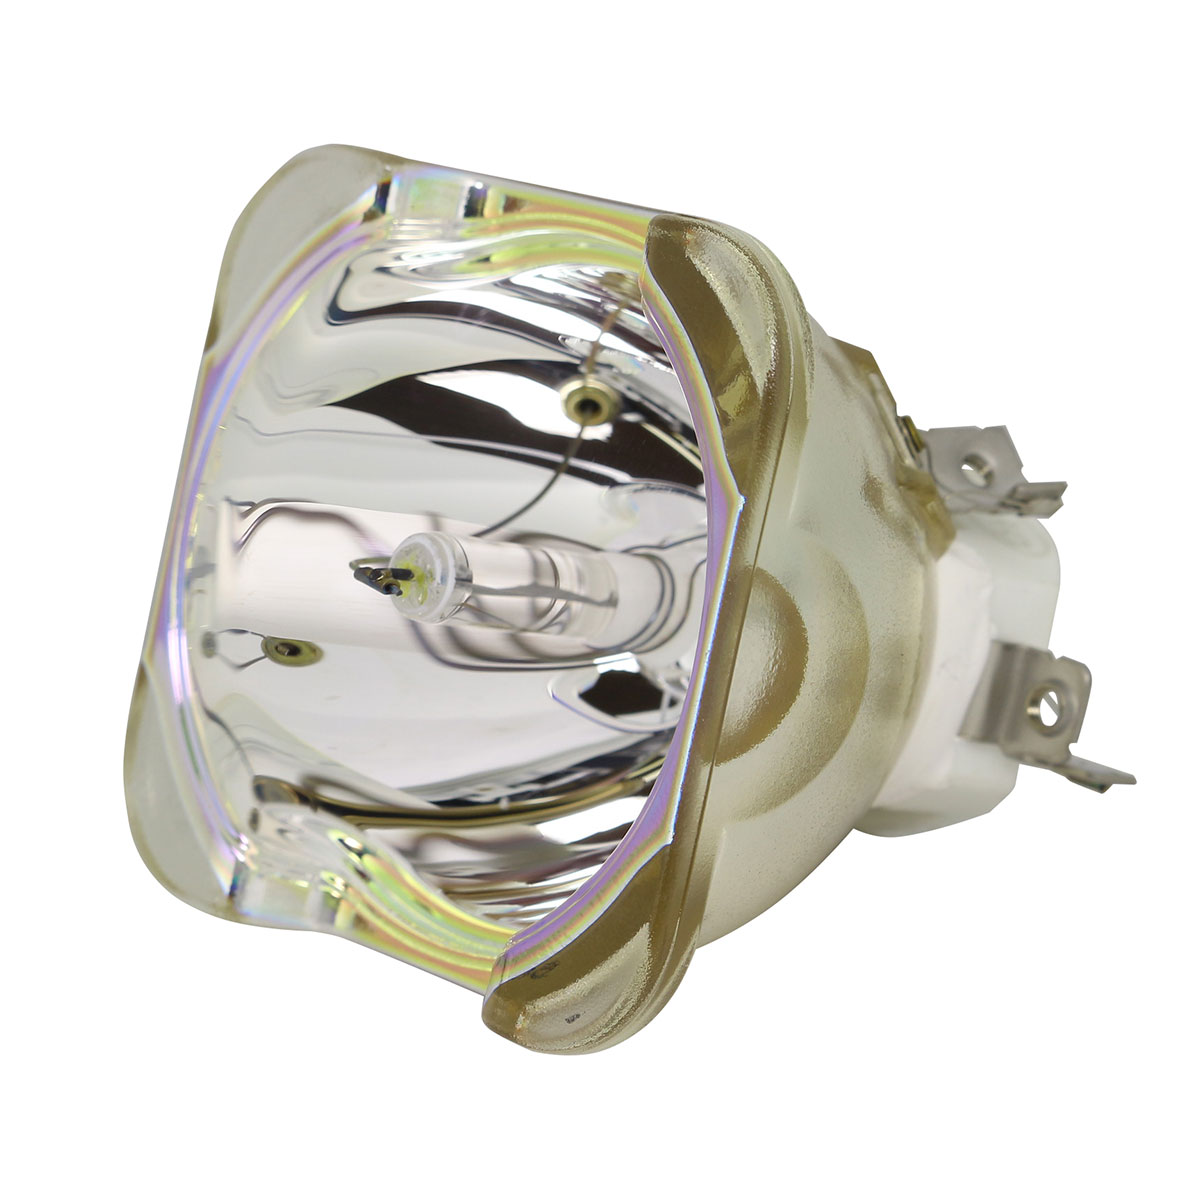 Ushio NSH Replacement Bulb for the Christie Digital Boxer 2K30 Projector - image 2 of 8